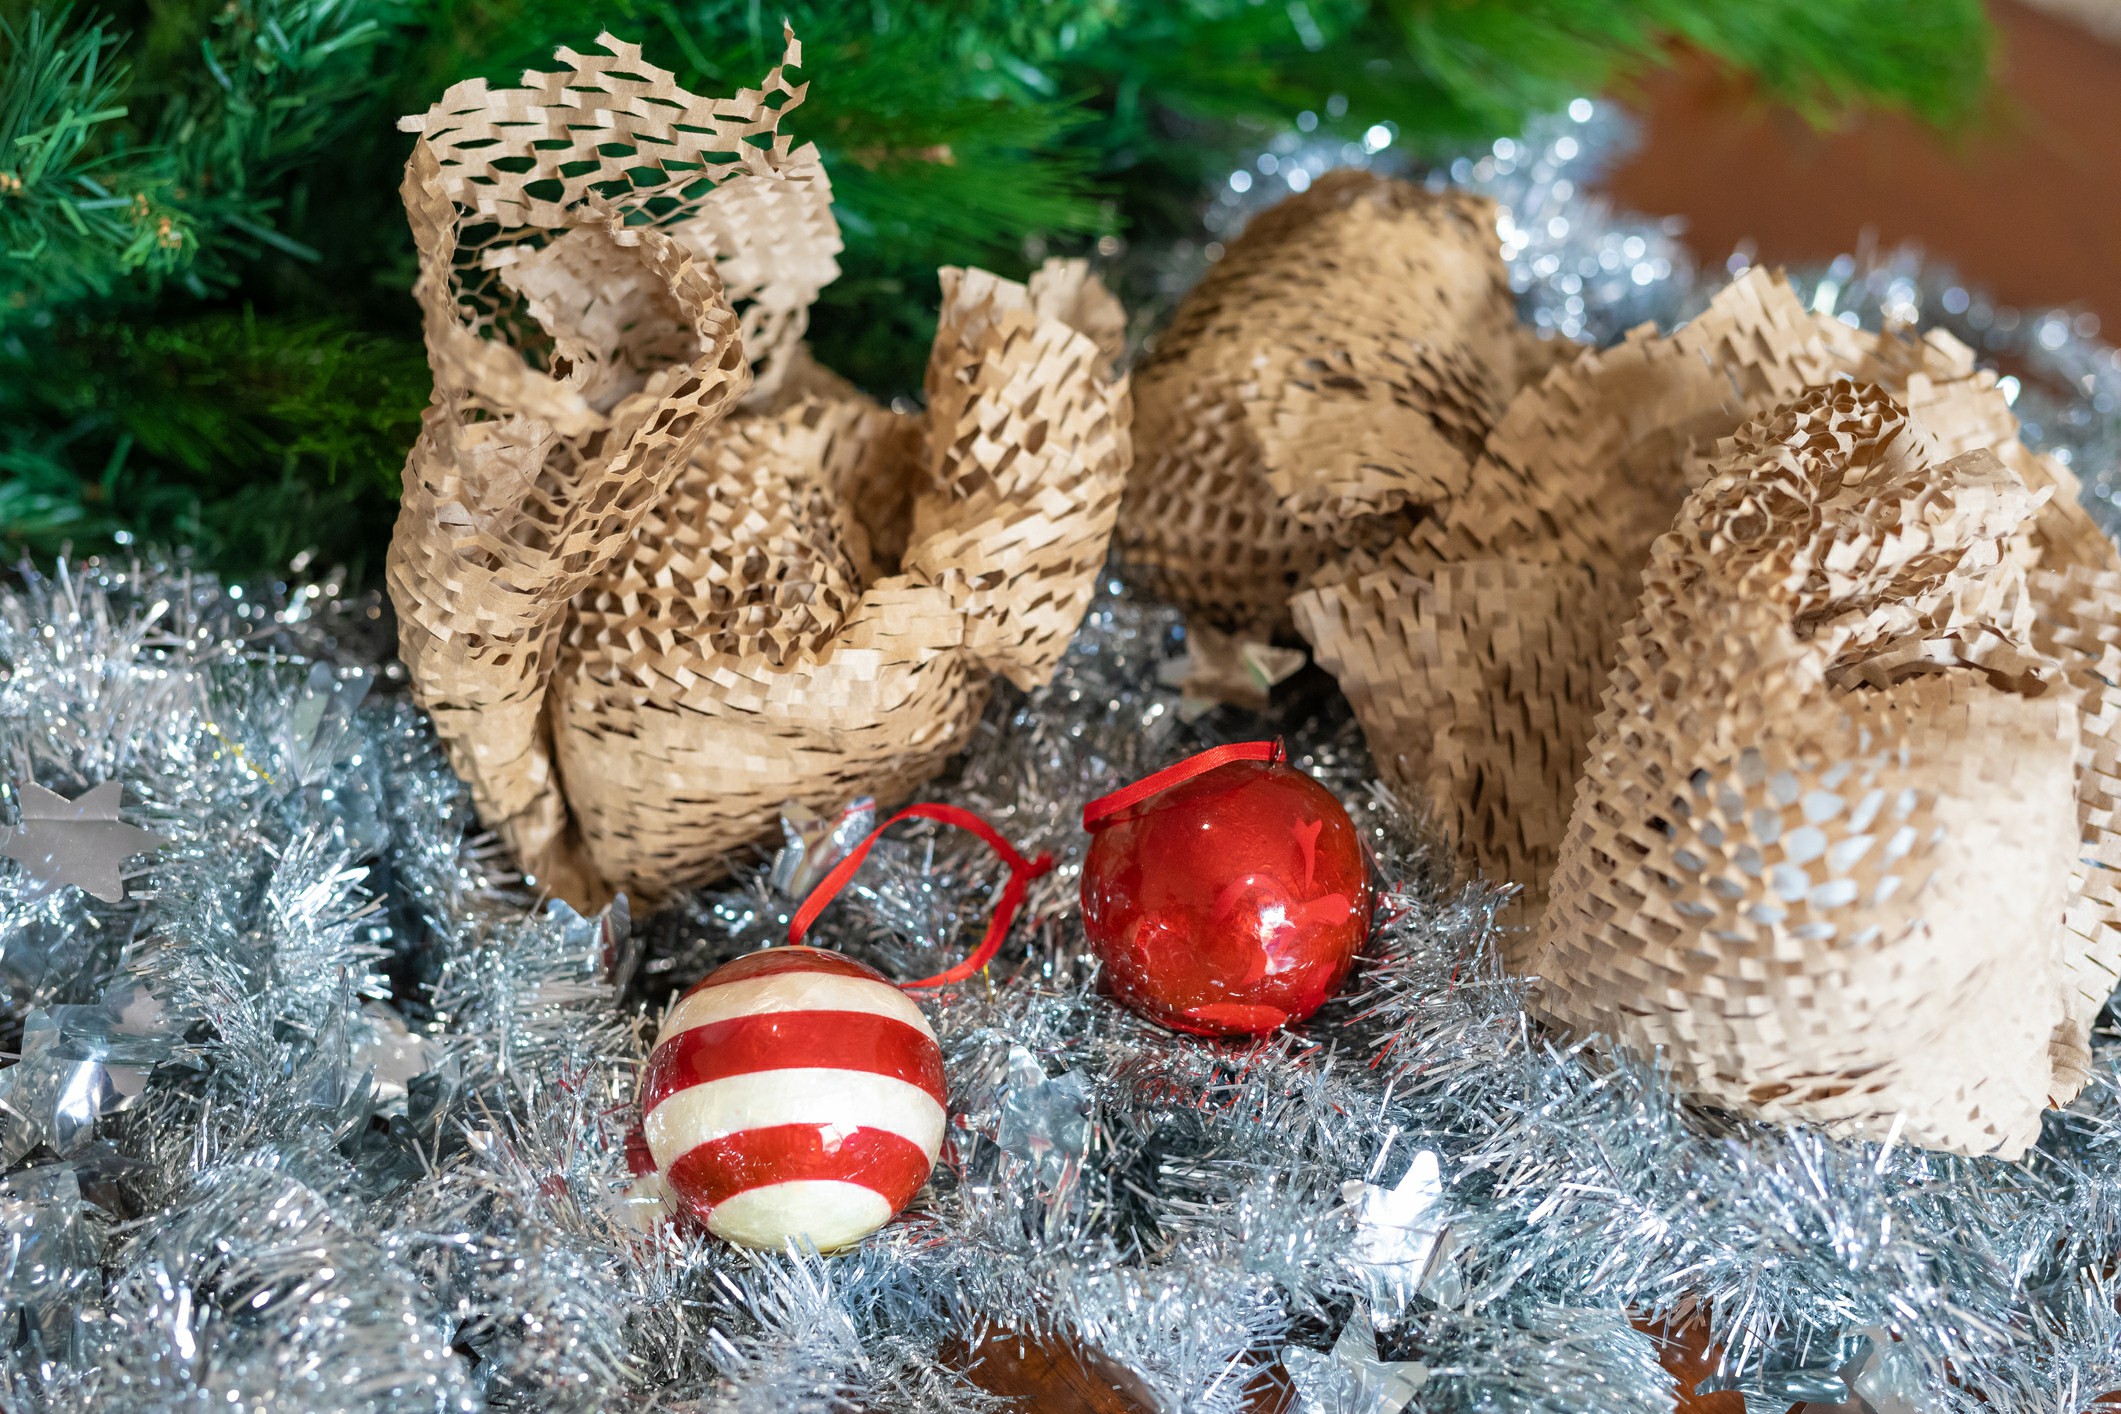 Packing with a Holiday Twist: Keeping Decorations and Gifts Safe and Organised